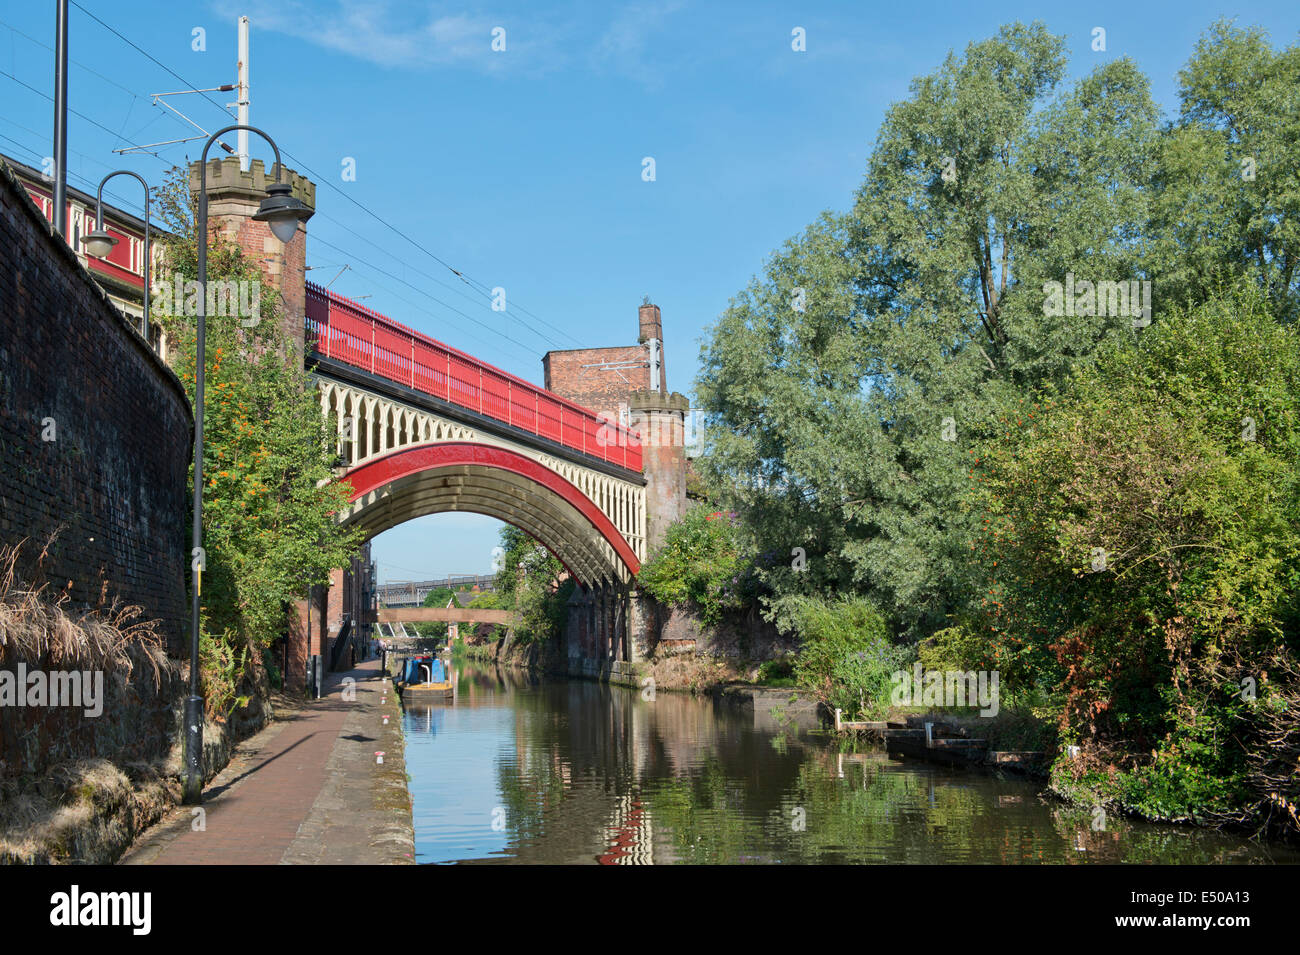 The Castlefield Urban Heritage Park and historic inner city canal conservation area including railway bridge in Manchester, UK. Stock Photo